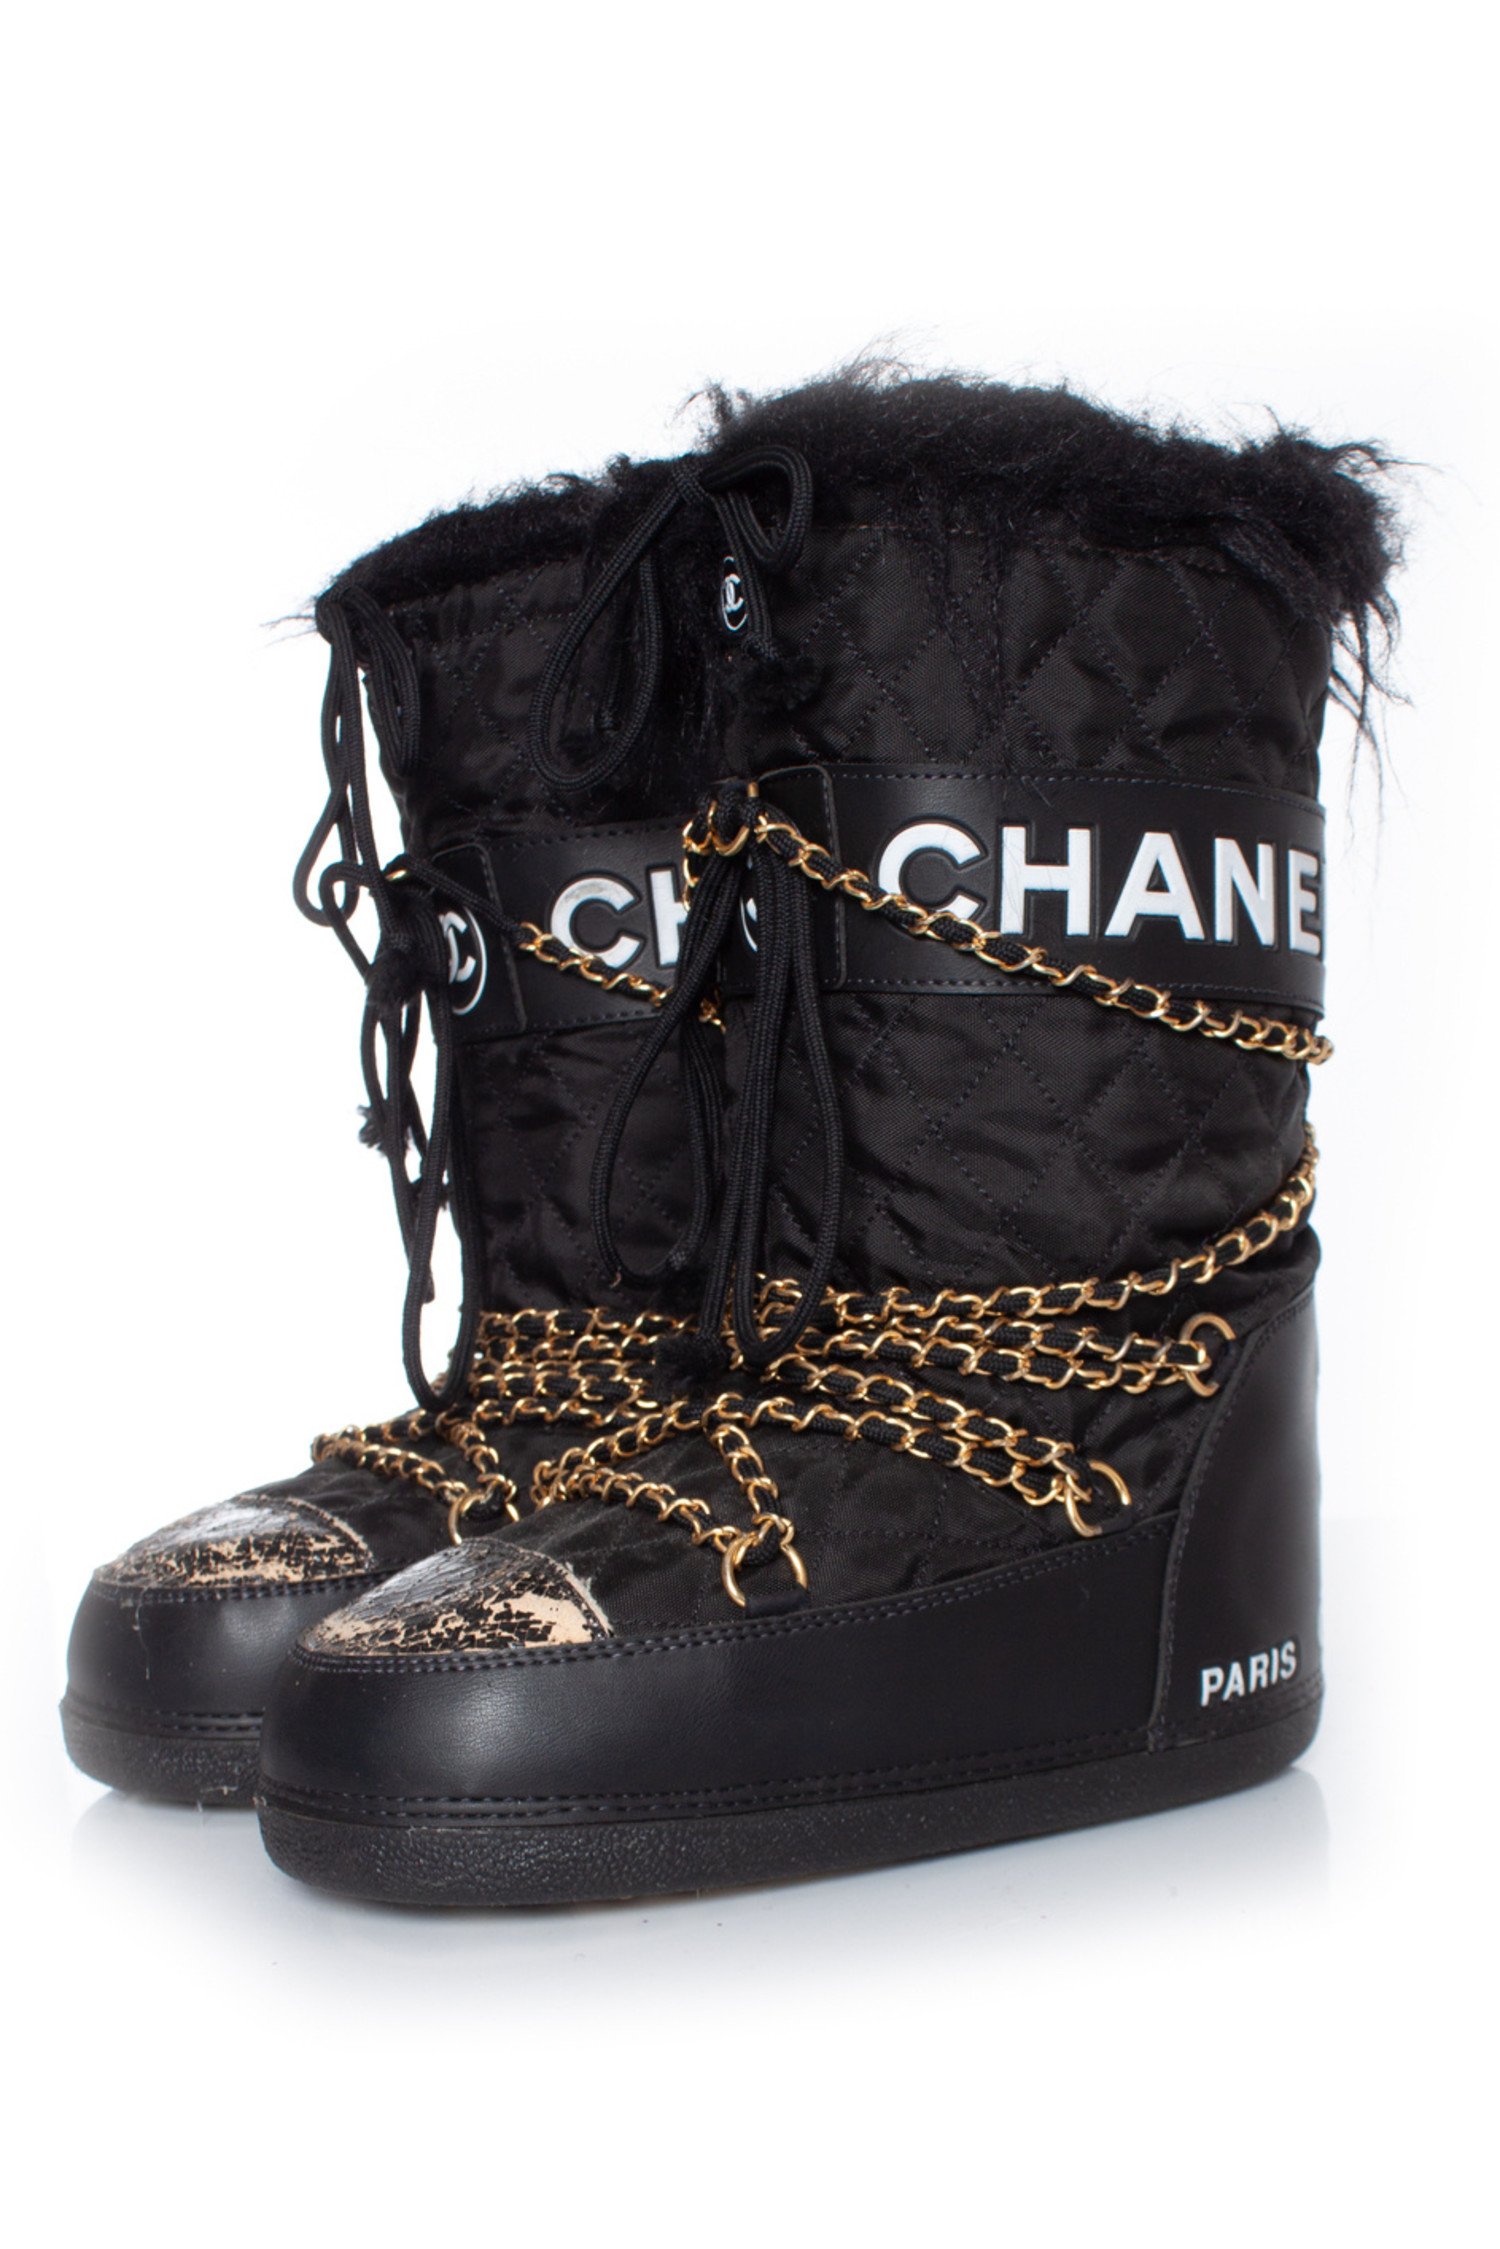 Chanel, Moon boots with gold chain - Unique Designer Pieces